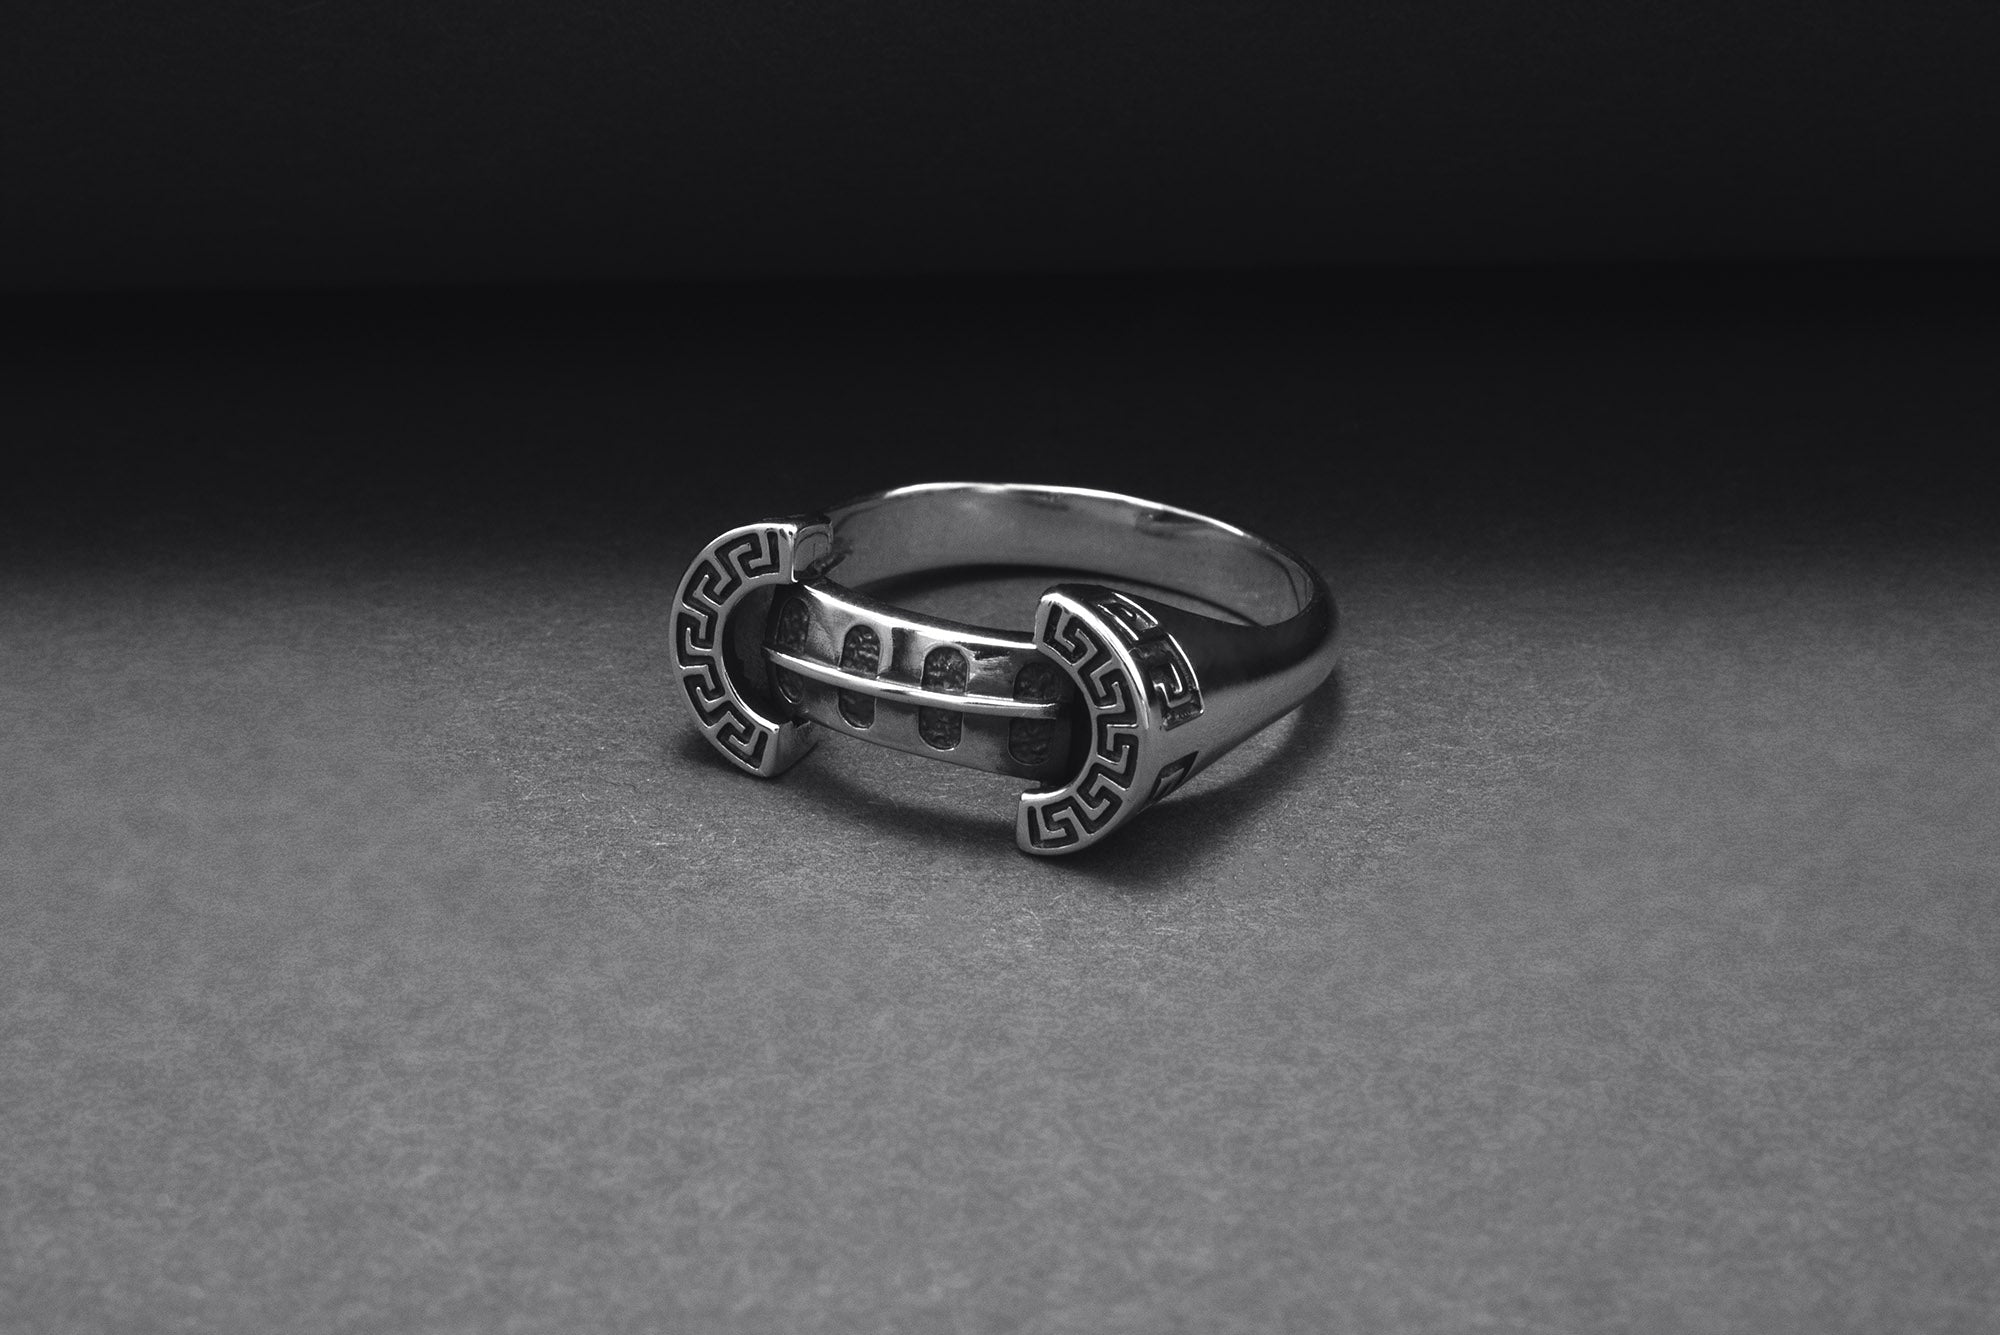 925 Silver Colosseum Road Ring with Ornament, Handcrafted Greek Jewelry - vikingworkshop